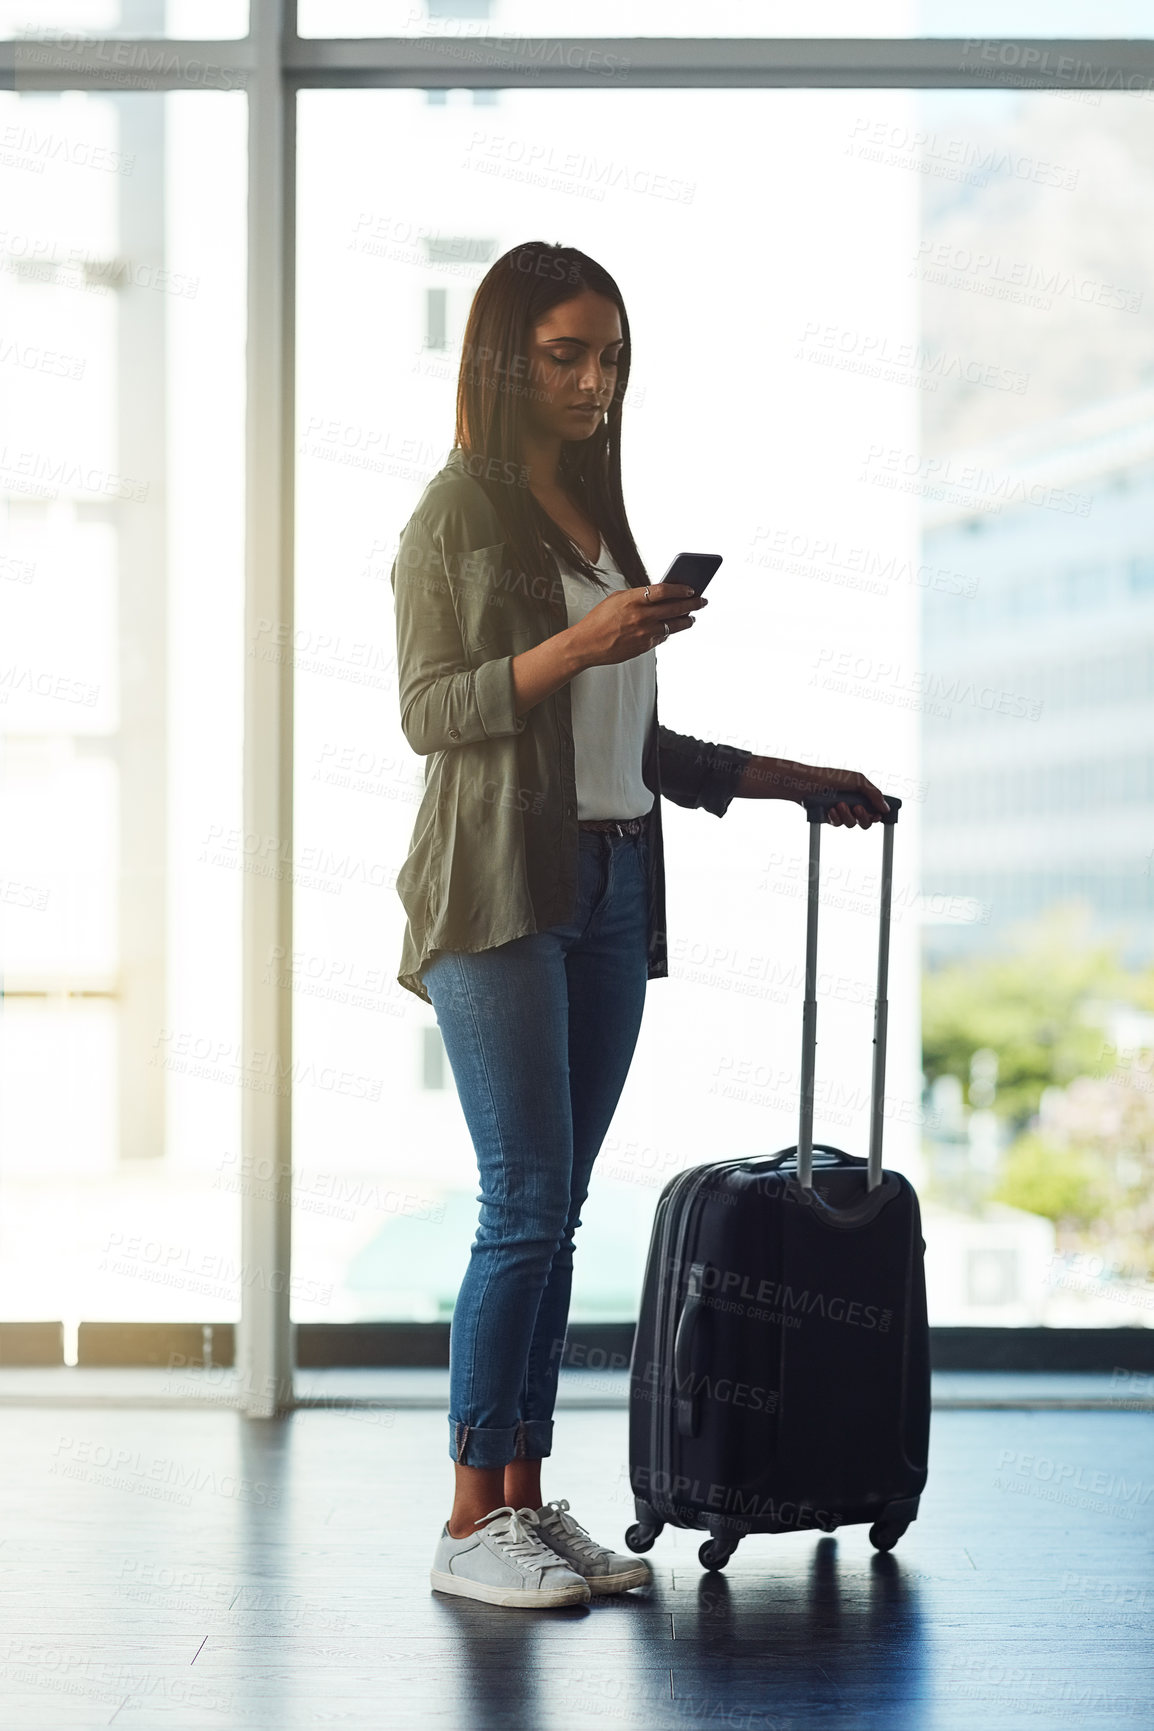 Buy stock photo Shot of an attractive young woman using a cellphone in an airport